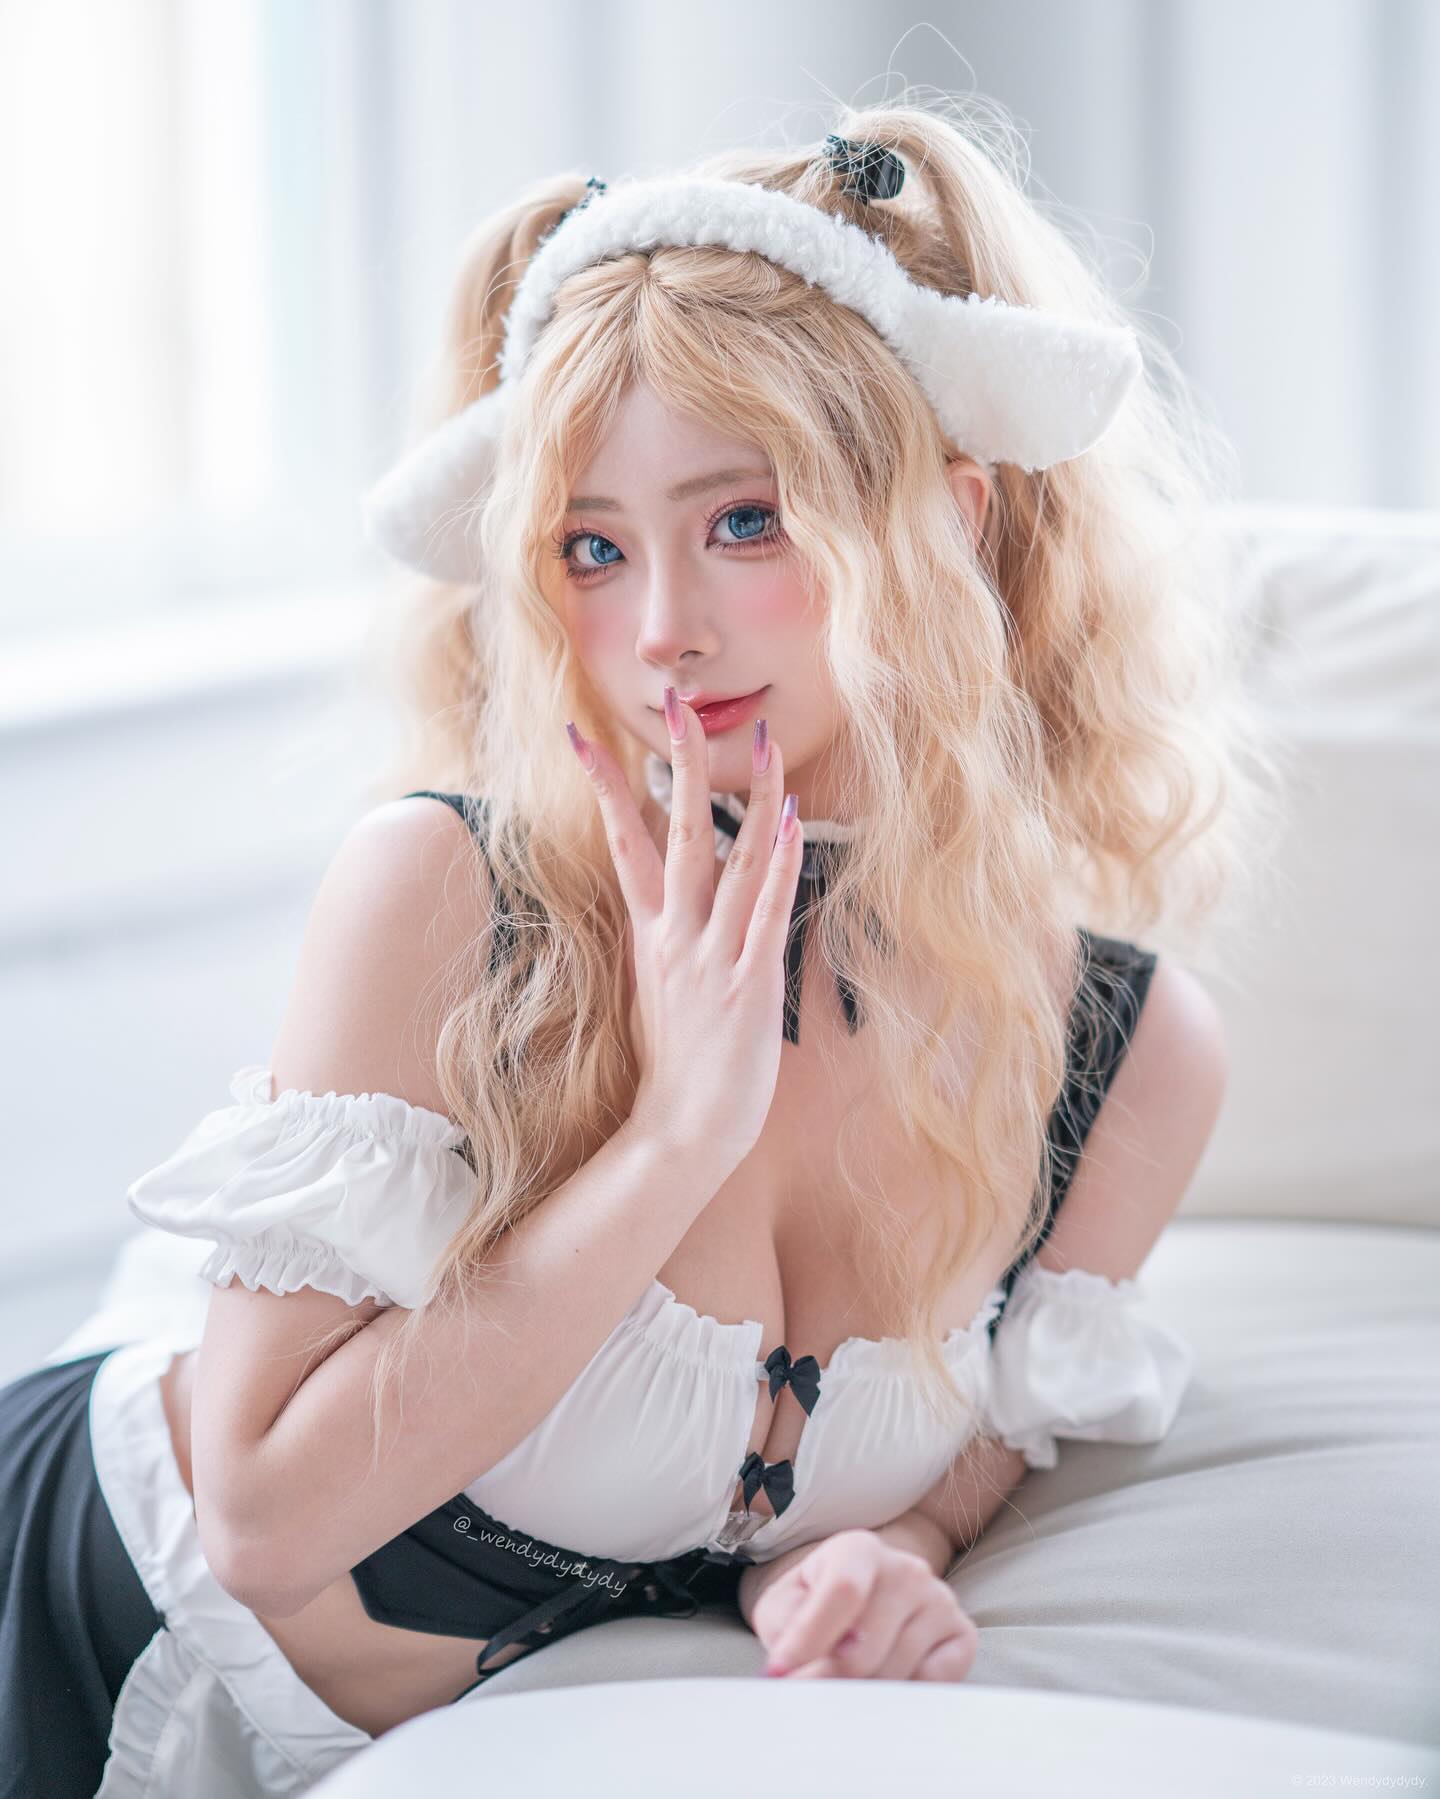 Good morning darling, would you like to start off with breakfast? Or me…❤️?
早安亲爱的～ 你是想先吃早餐呢？还是我…❤️?
.
Sheepmaid photoset is now available on Gumroad & Onlyfans(free sub) !!!
🔗 in the bio ~ 
.
Photo by @marshallmalloww